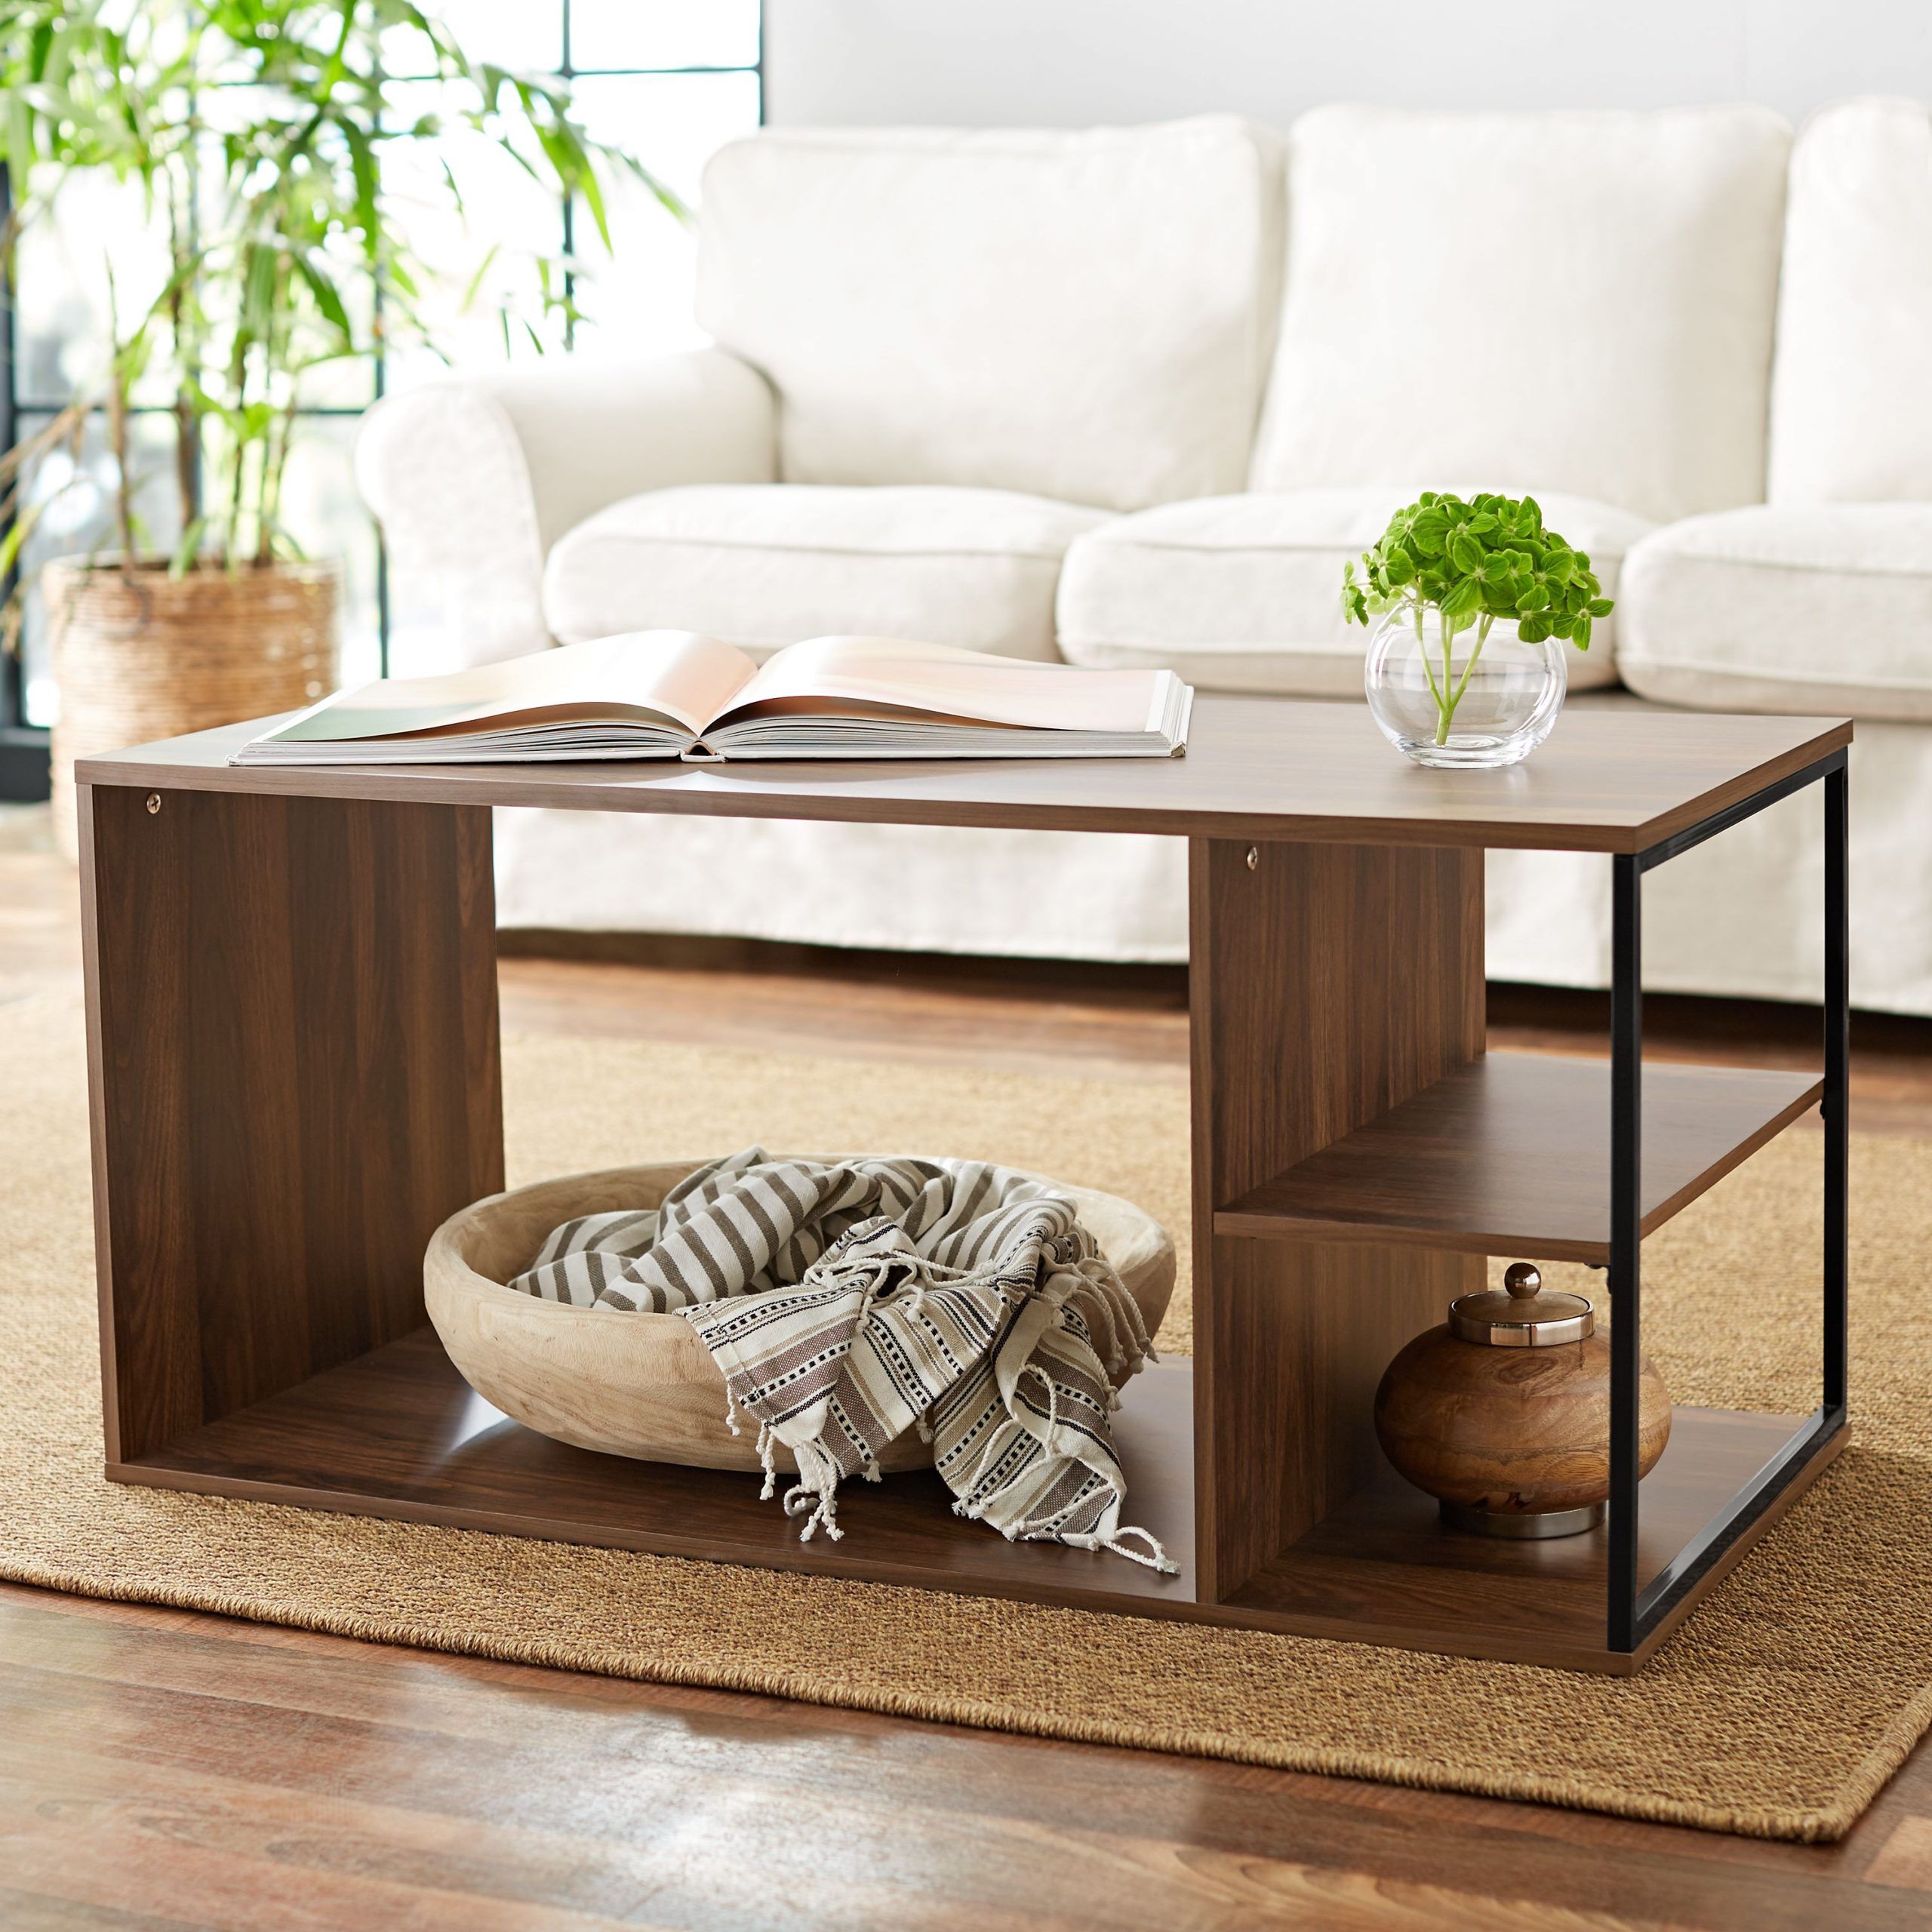 Mainstays Kalla Wood And Metal Coffee Table – Walmart For Best And Newest Espresso Wood Storage Coffee Tables (View 2 of 20)